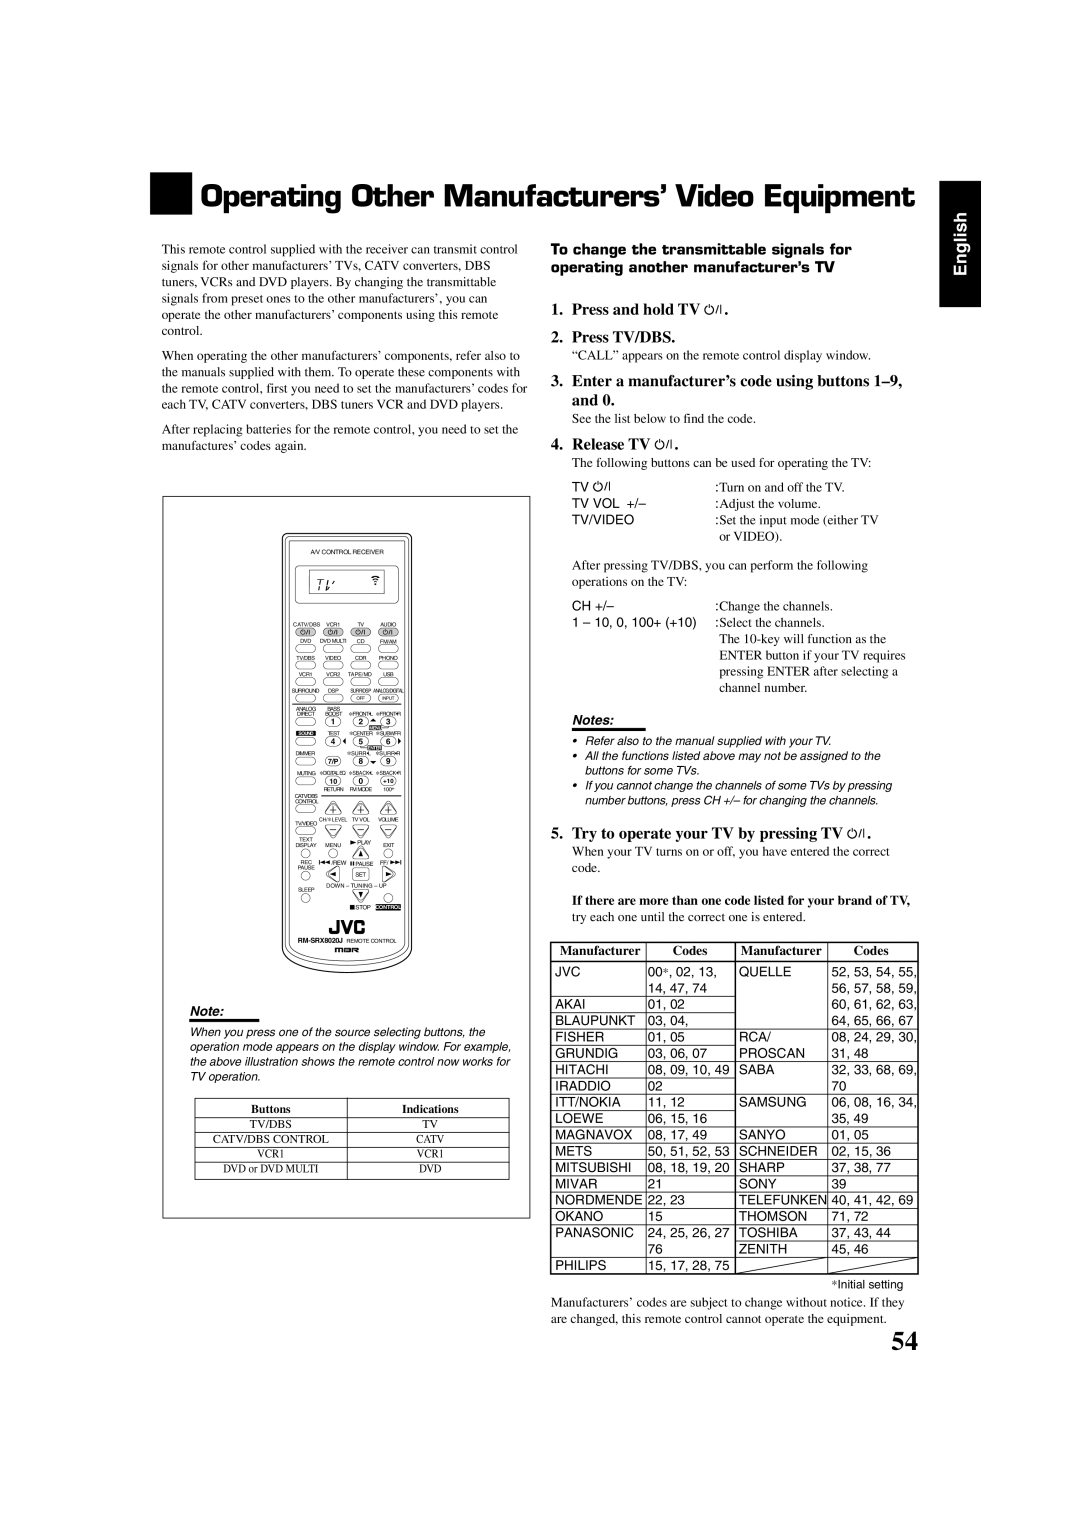 JVC RX-8020VBK manual Operating Other Manufacturers’ Video Equipment, English, Codes 